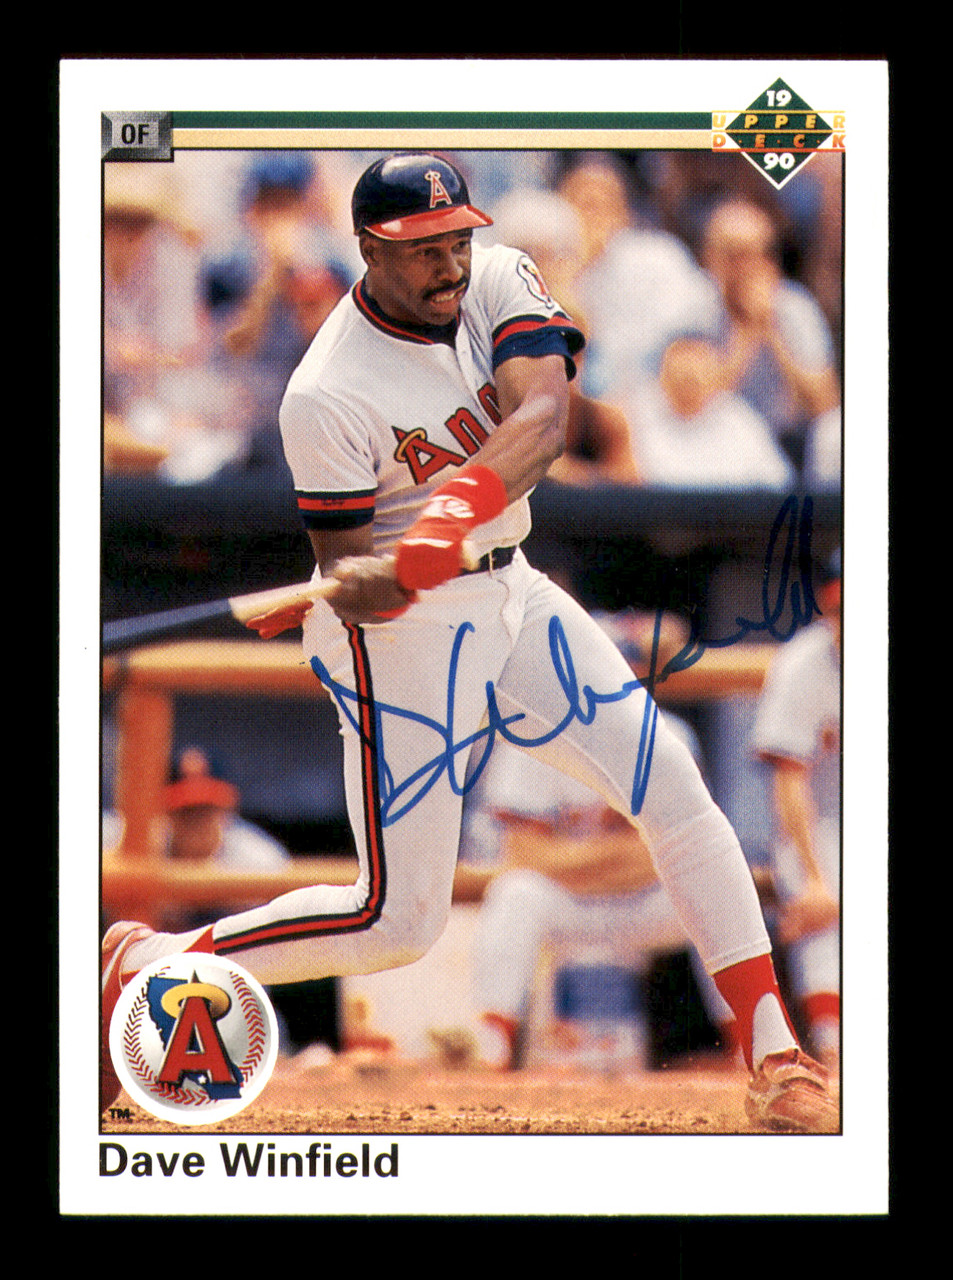 Dave Smith Autographed 1990 Upper Deck Card #448 Houston Astros SKU #184026  - Mill Creek Sports